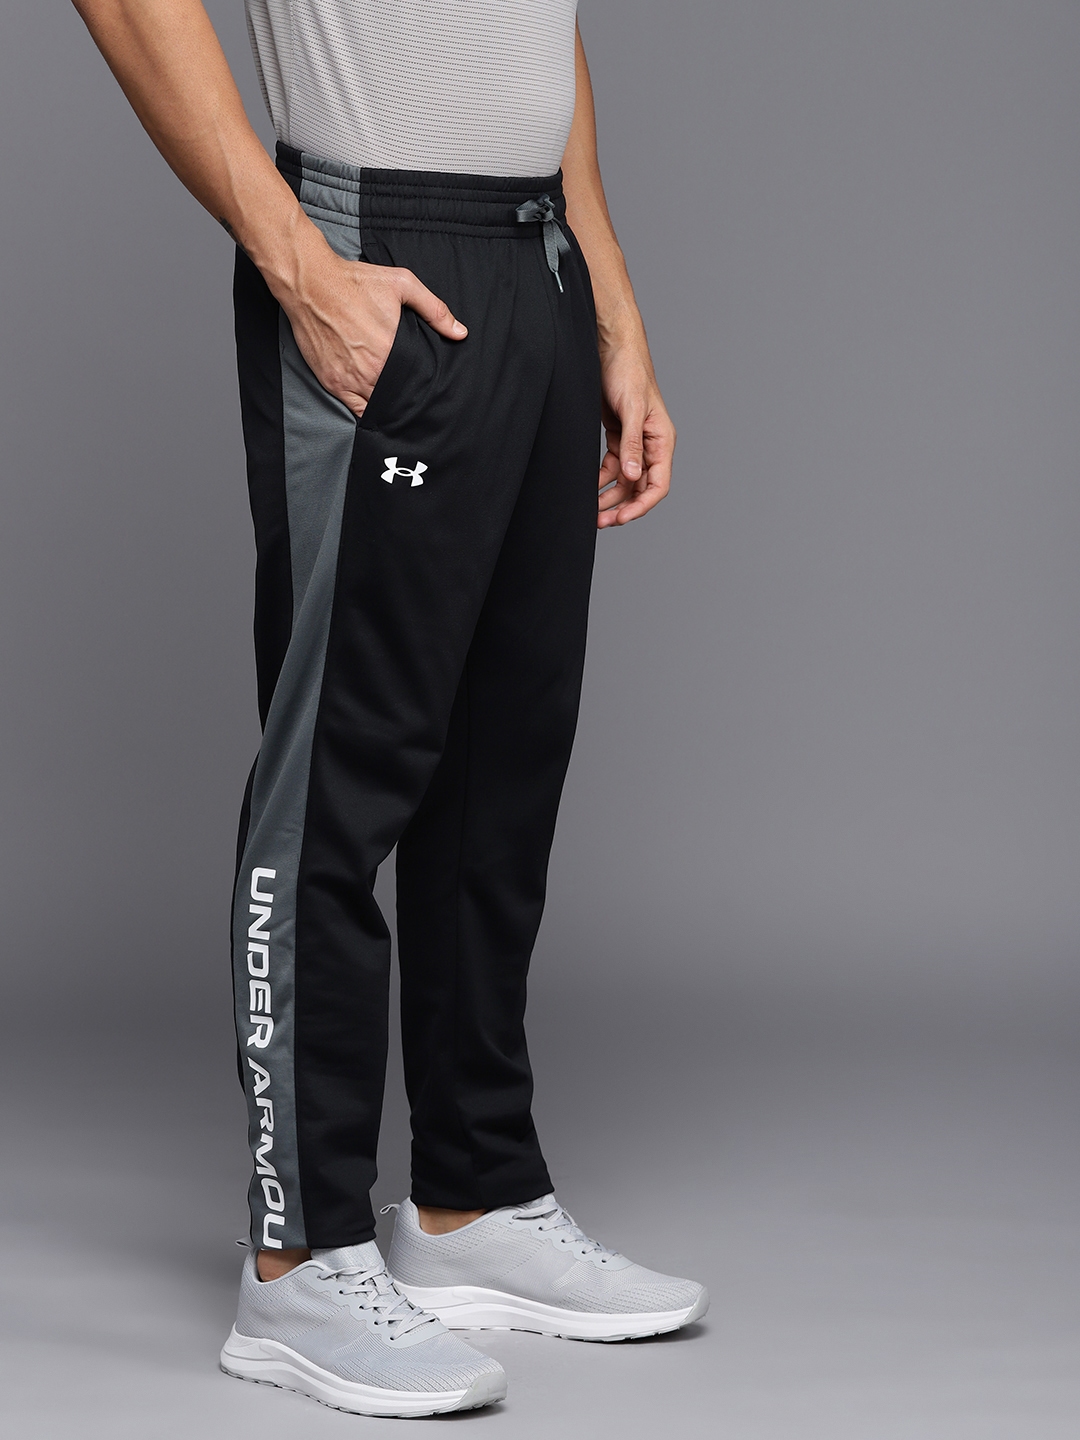 UNDER ARMOUR Checkered Men Black Track Pants - Buy UNDER ARMOUR